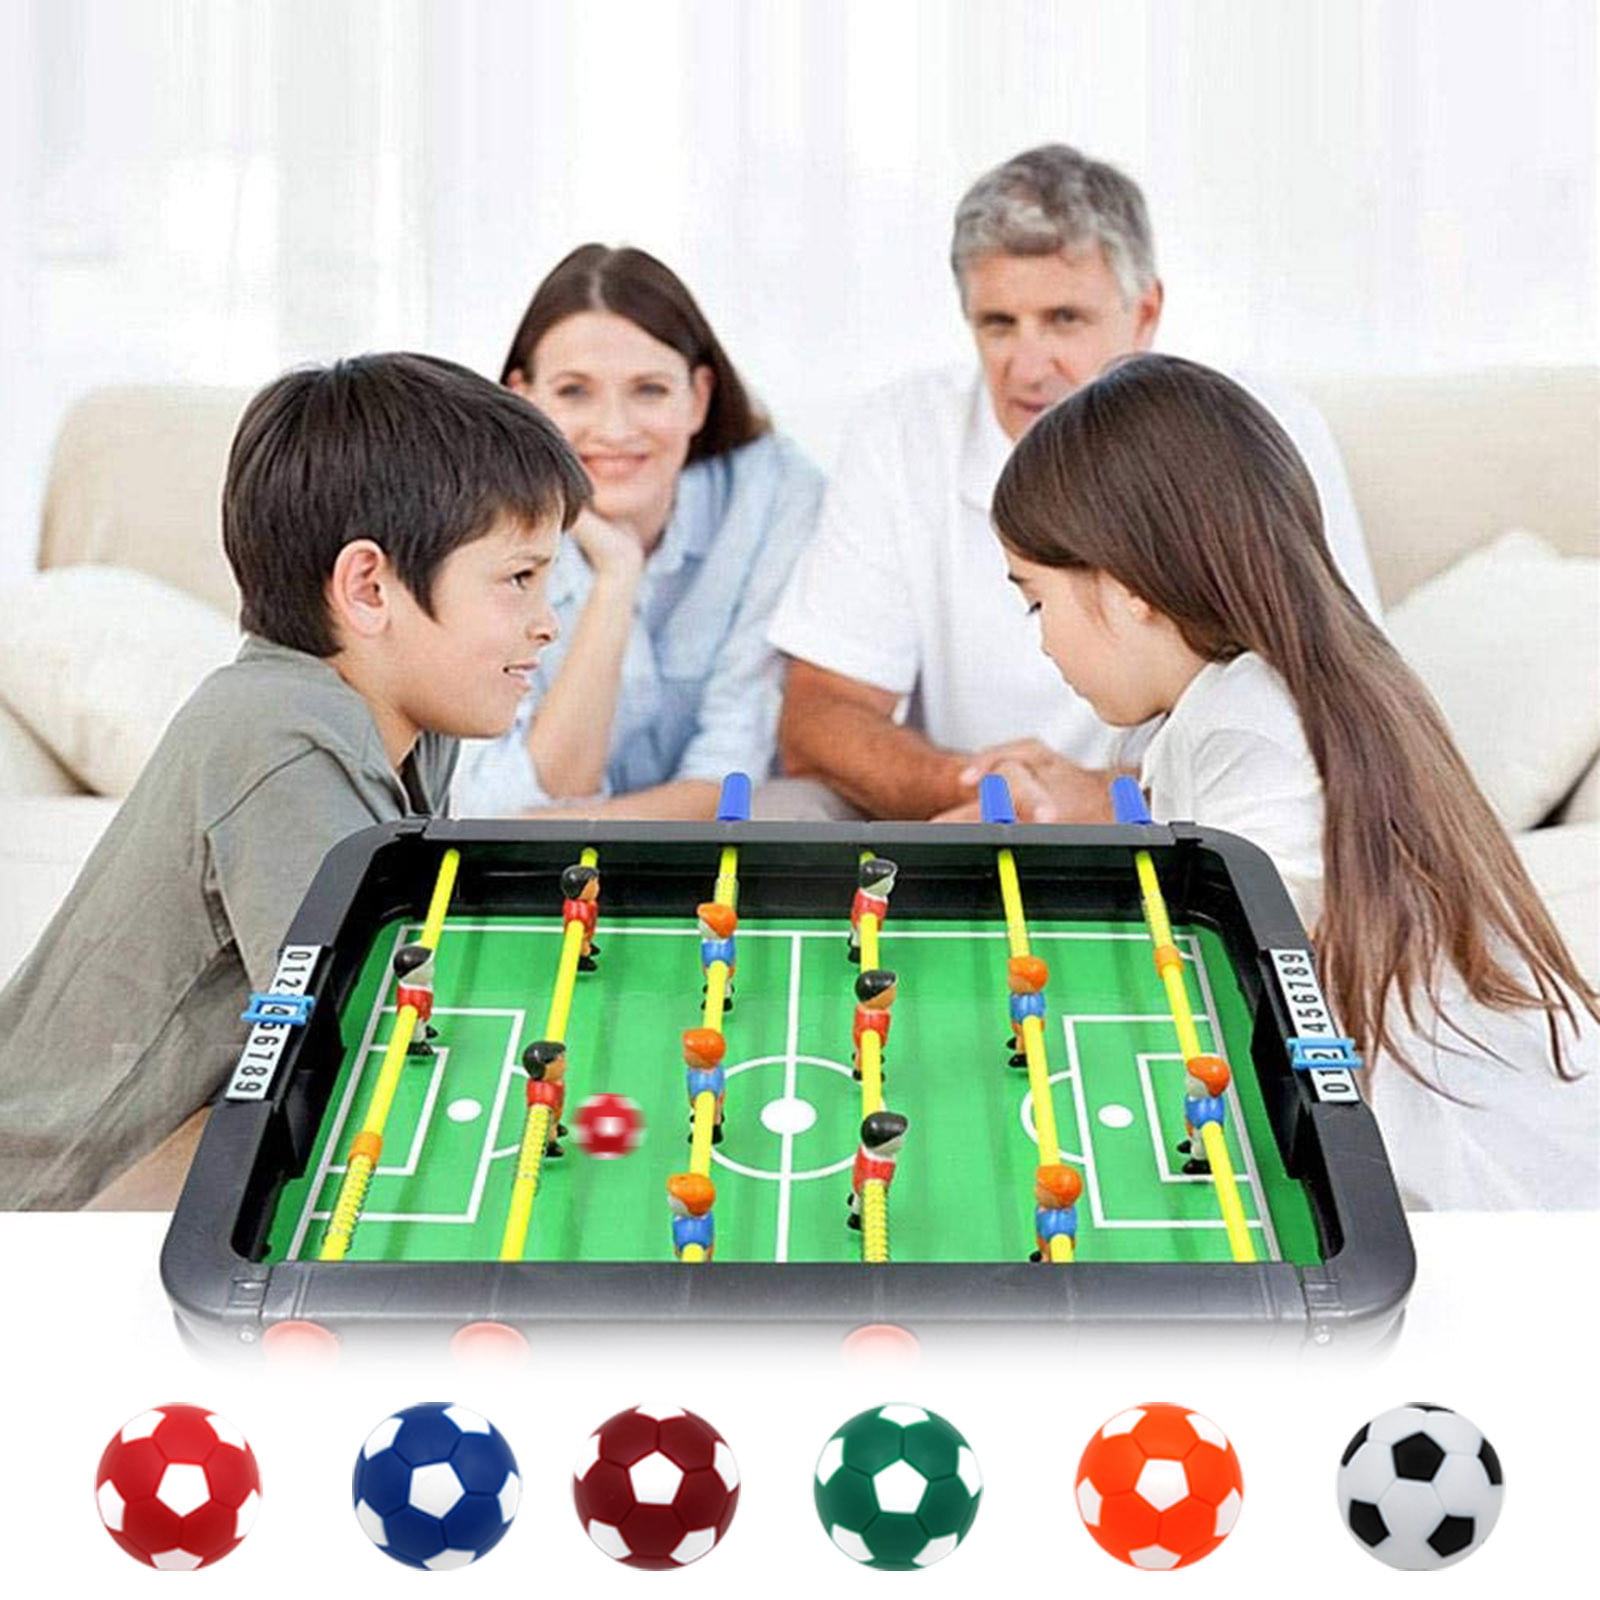 4pc 32mm Adult Children Replacement Ball Foot Ball Table Soccer Tabletop Game 